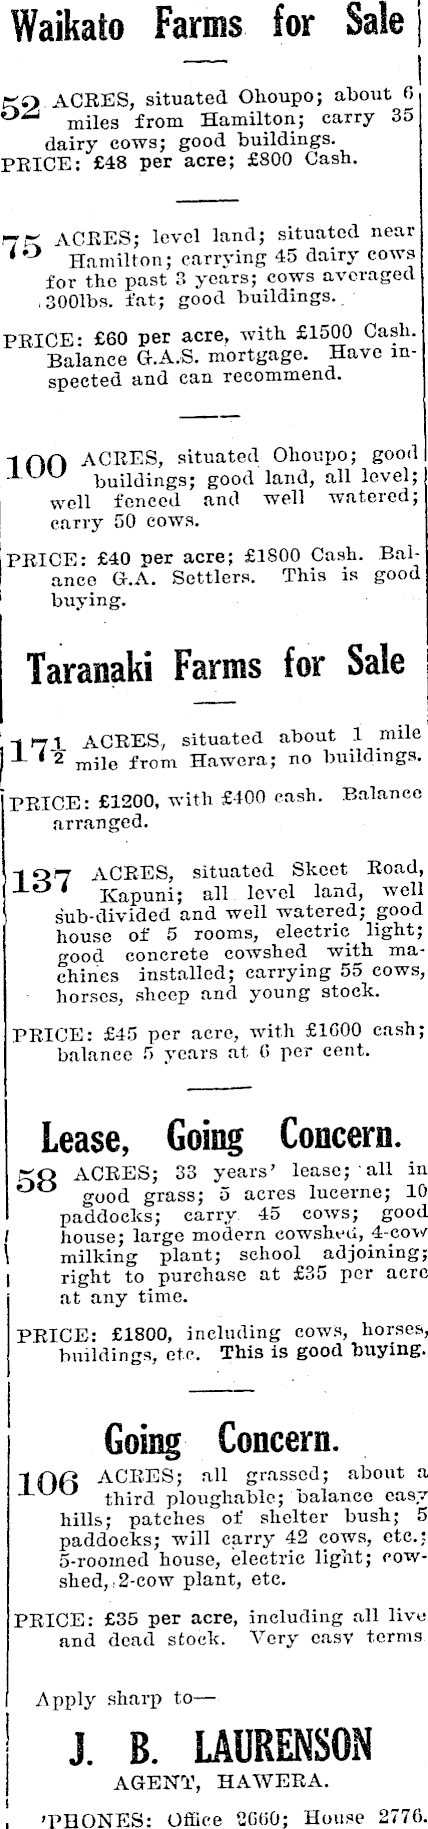 Papers Past Newspapers Hawera Star 6 June 1930 Page 4 Advertisements Column 2